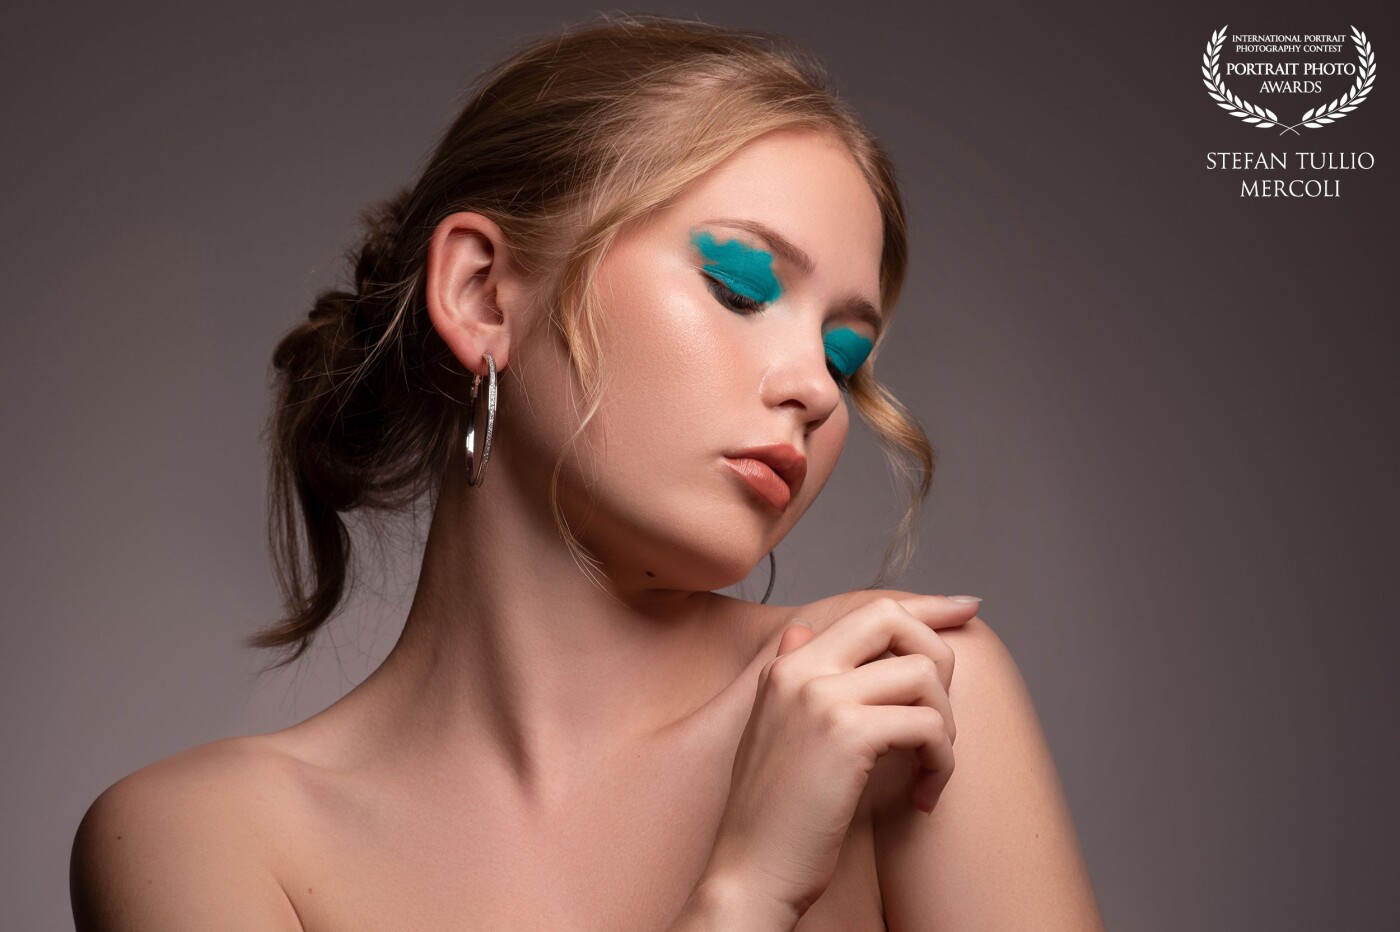 This pictures is part of an series with the theme pastel colors. The make up artist Nina from Ninchensart (instagram) did a great job and a modern make-up look. Thanks to the model agency Golden Model Gate GMG Switzerland for having model Michelle.